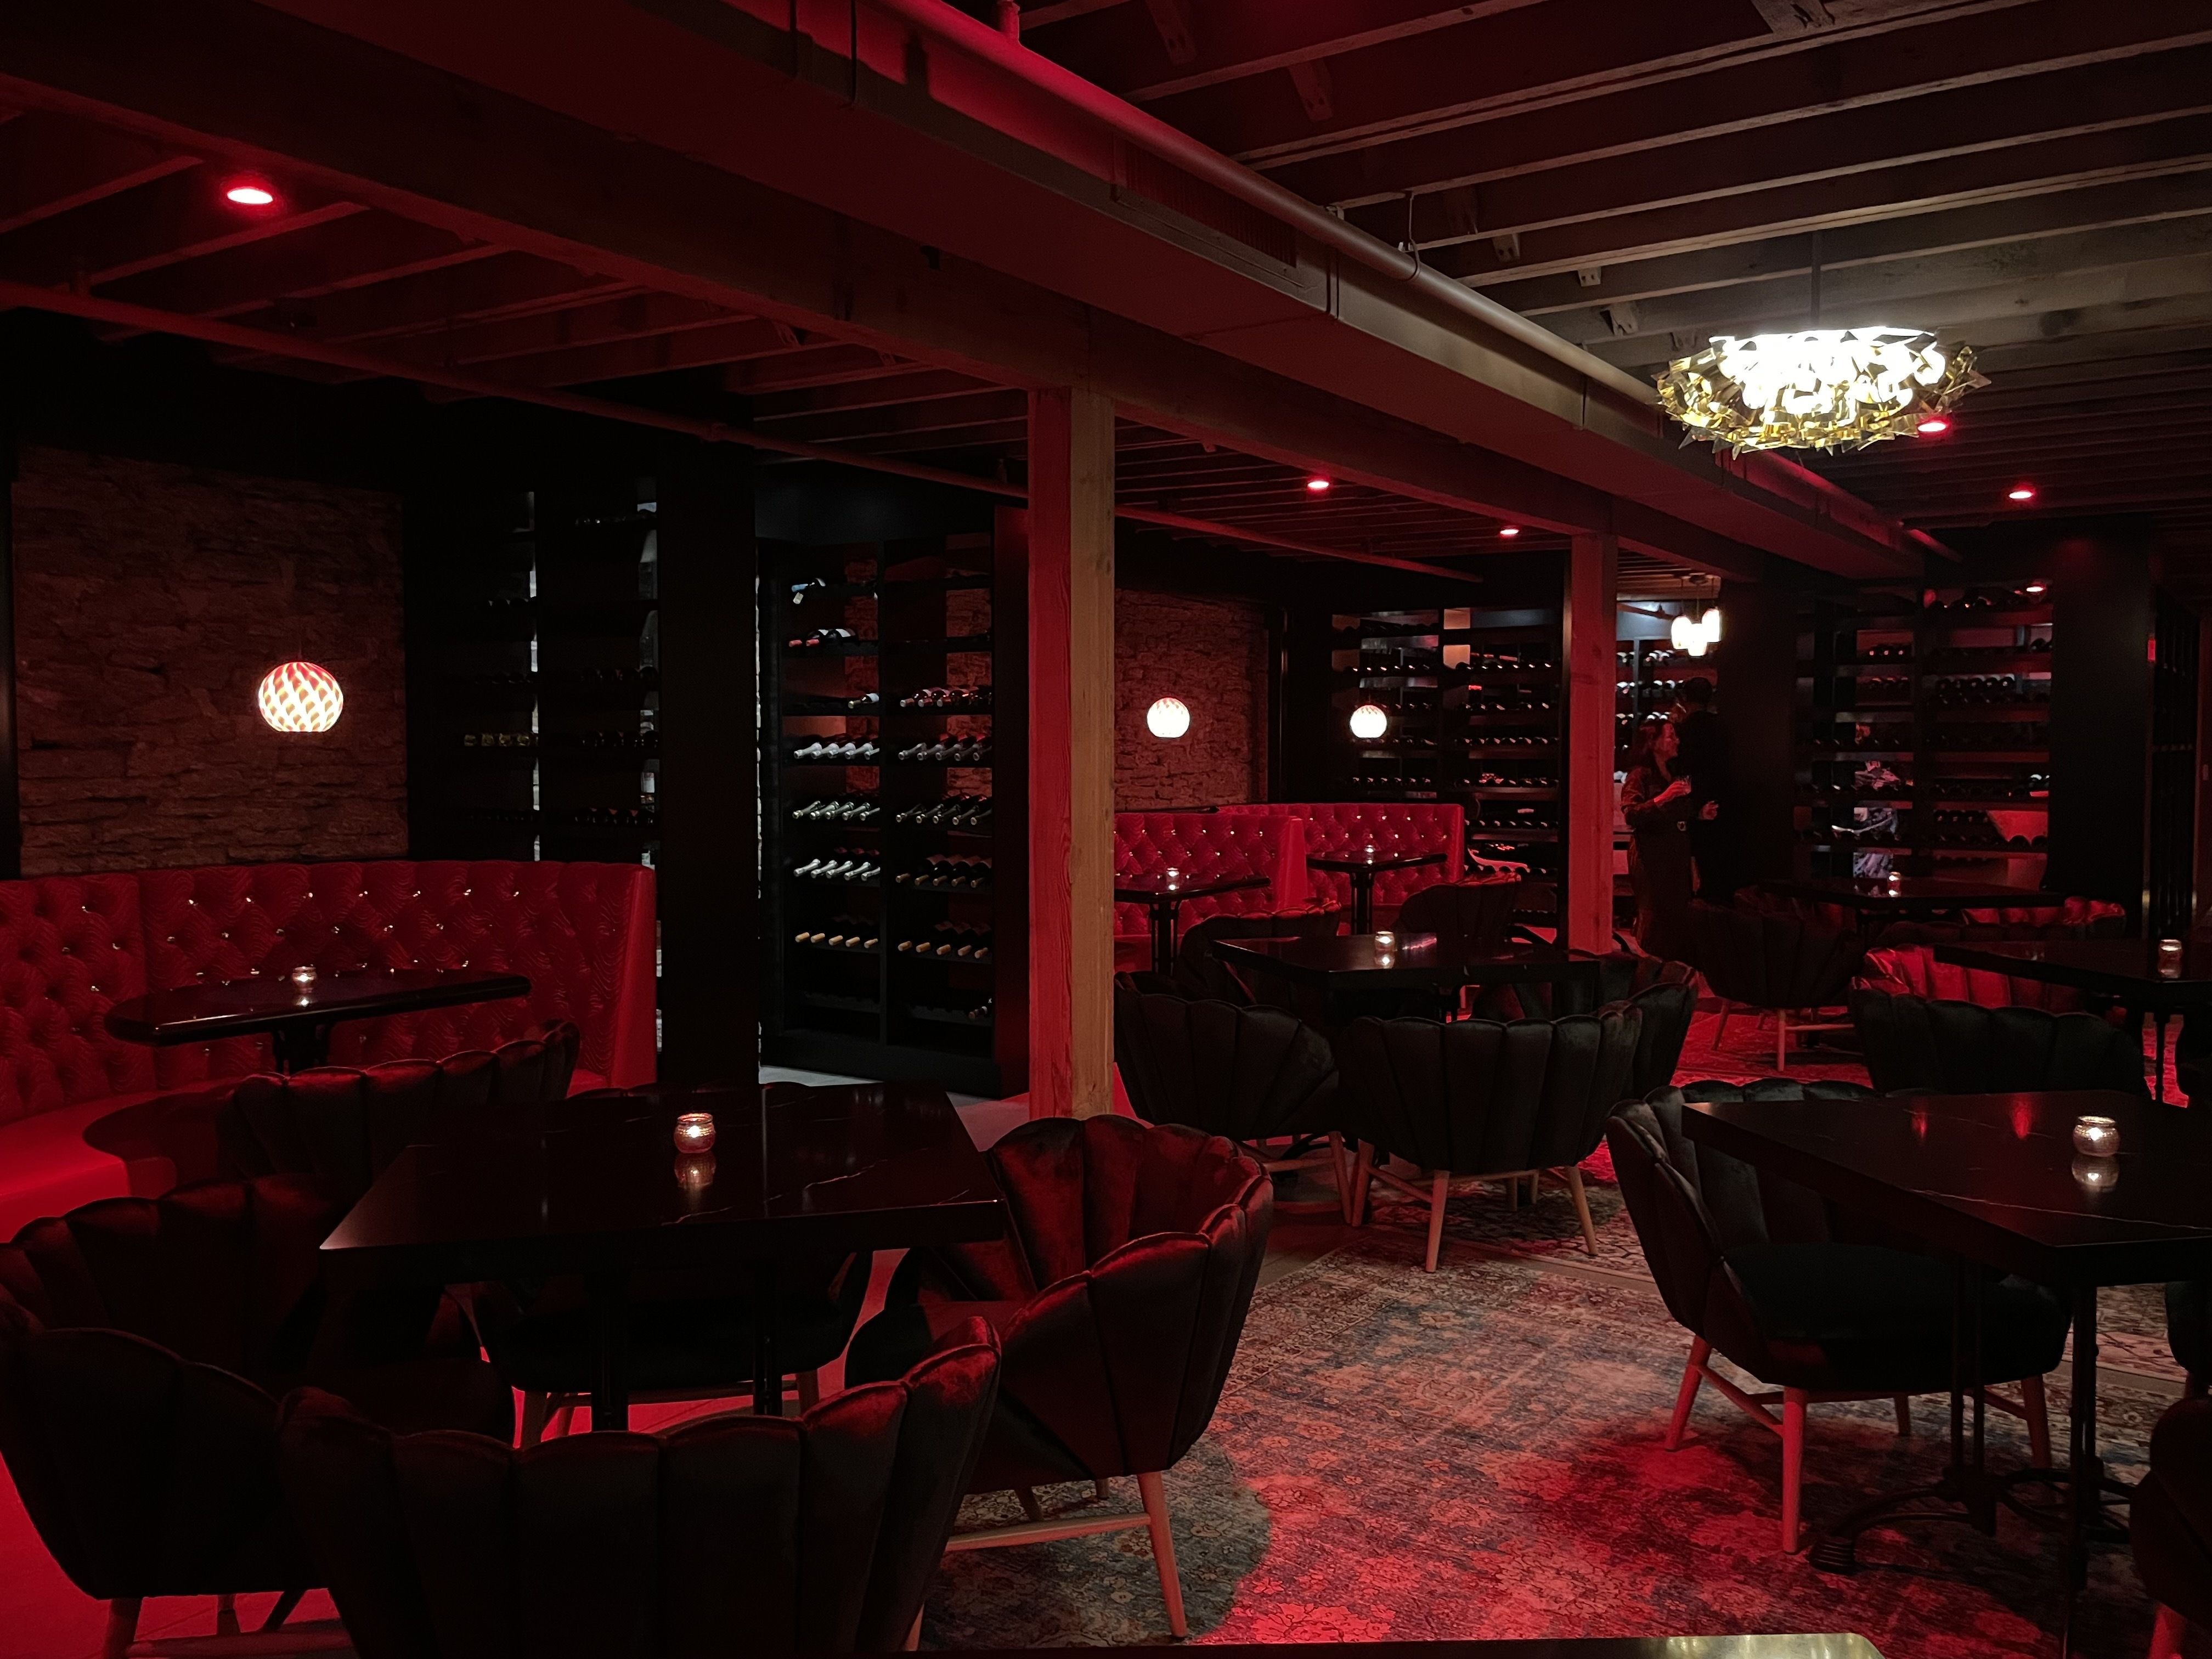 A room with red booths and black chairs, lit with red lighting.